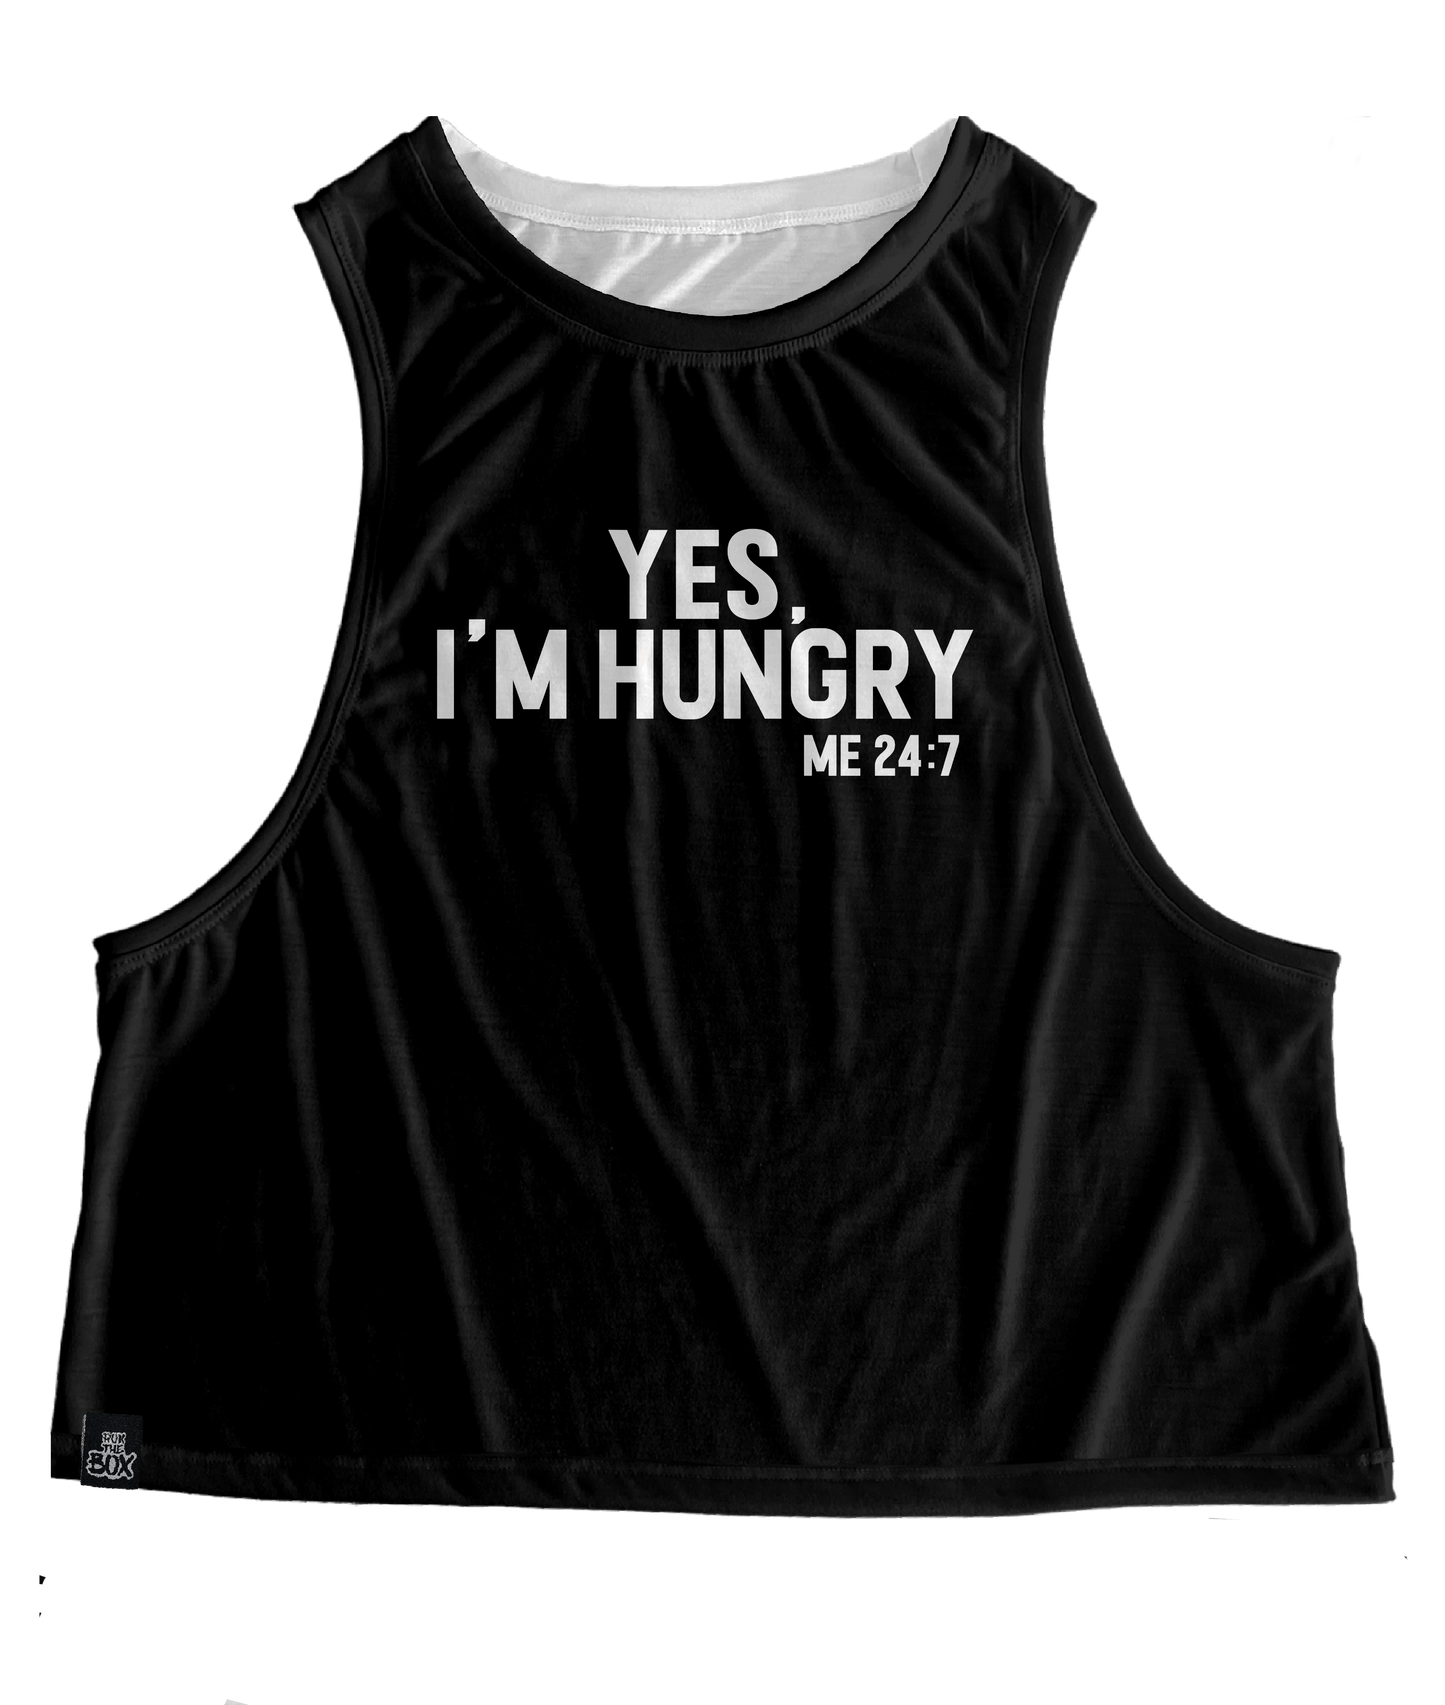 Yes, I’m Hungry (black)Tops